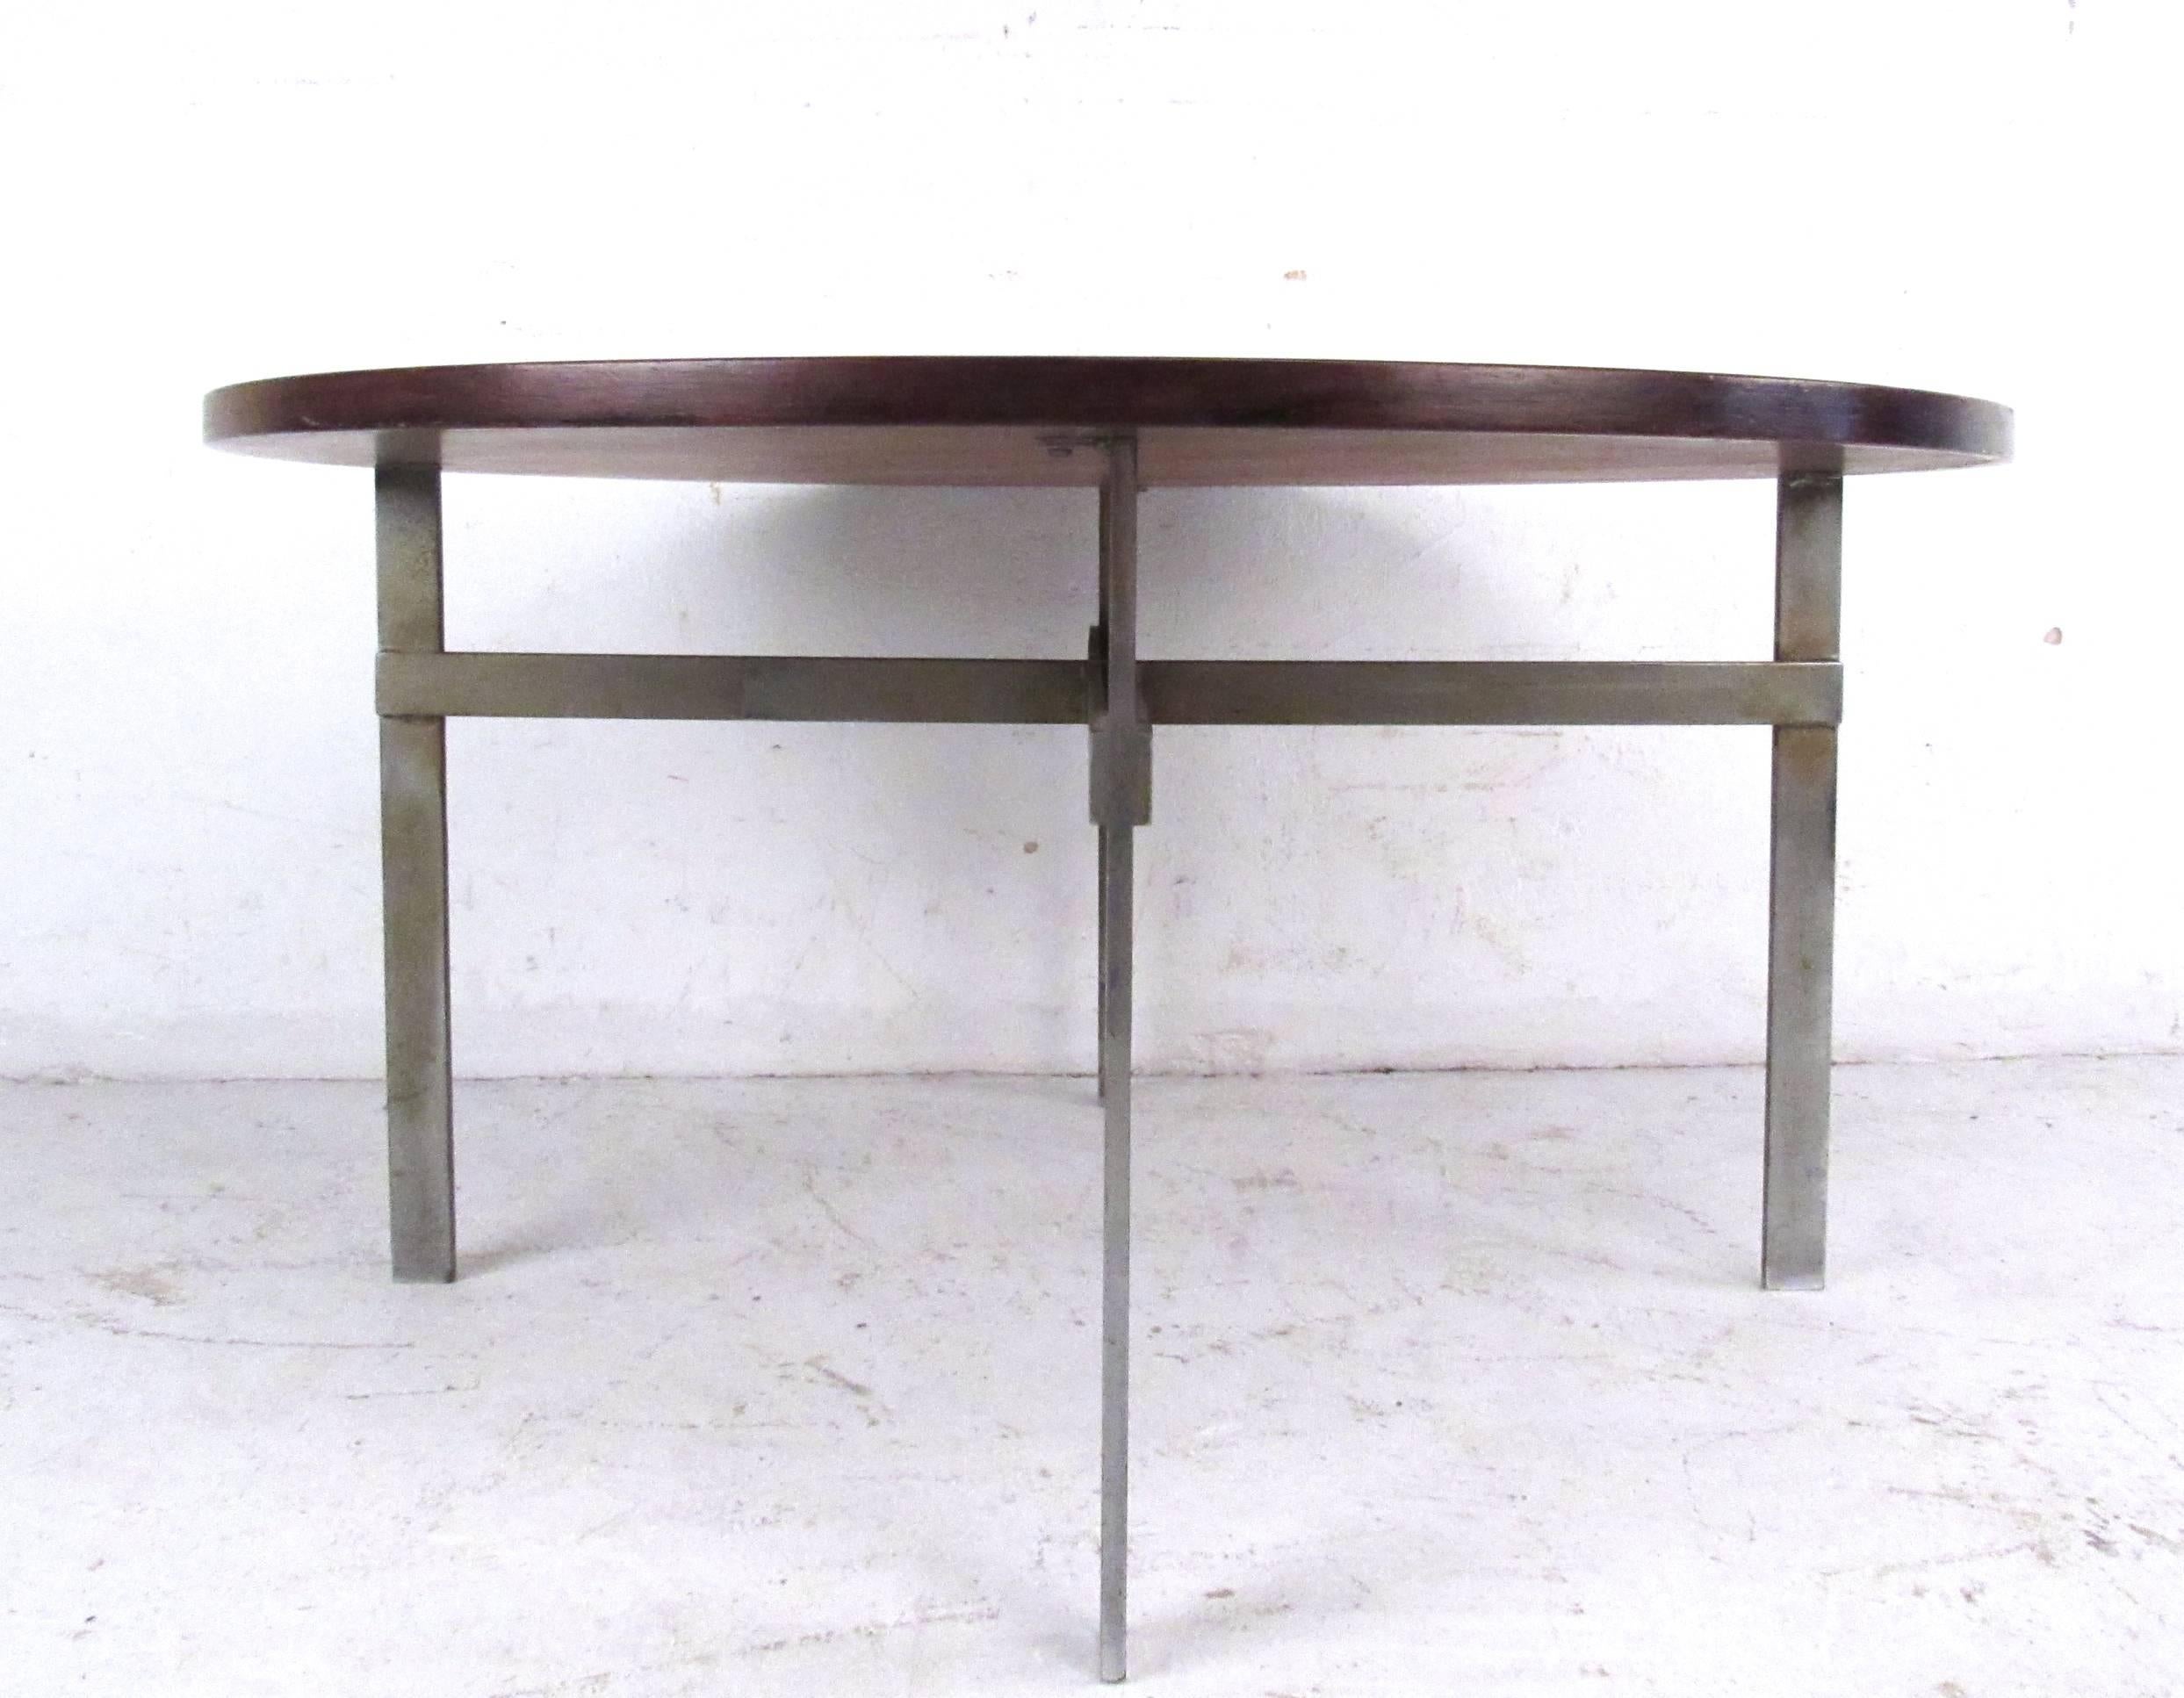 This unique Mid-Century rosewood cocktail table makes a unique circular coffee table in a variety of settings. Stylish Mid-Century Modern design with flat metal frame and added cross beams for style and support. Please confirm item location (NY or